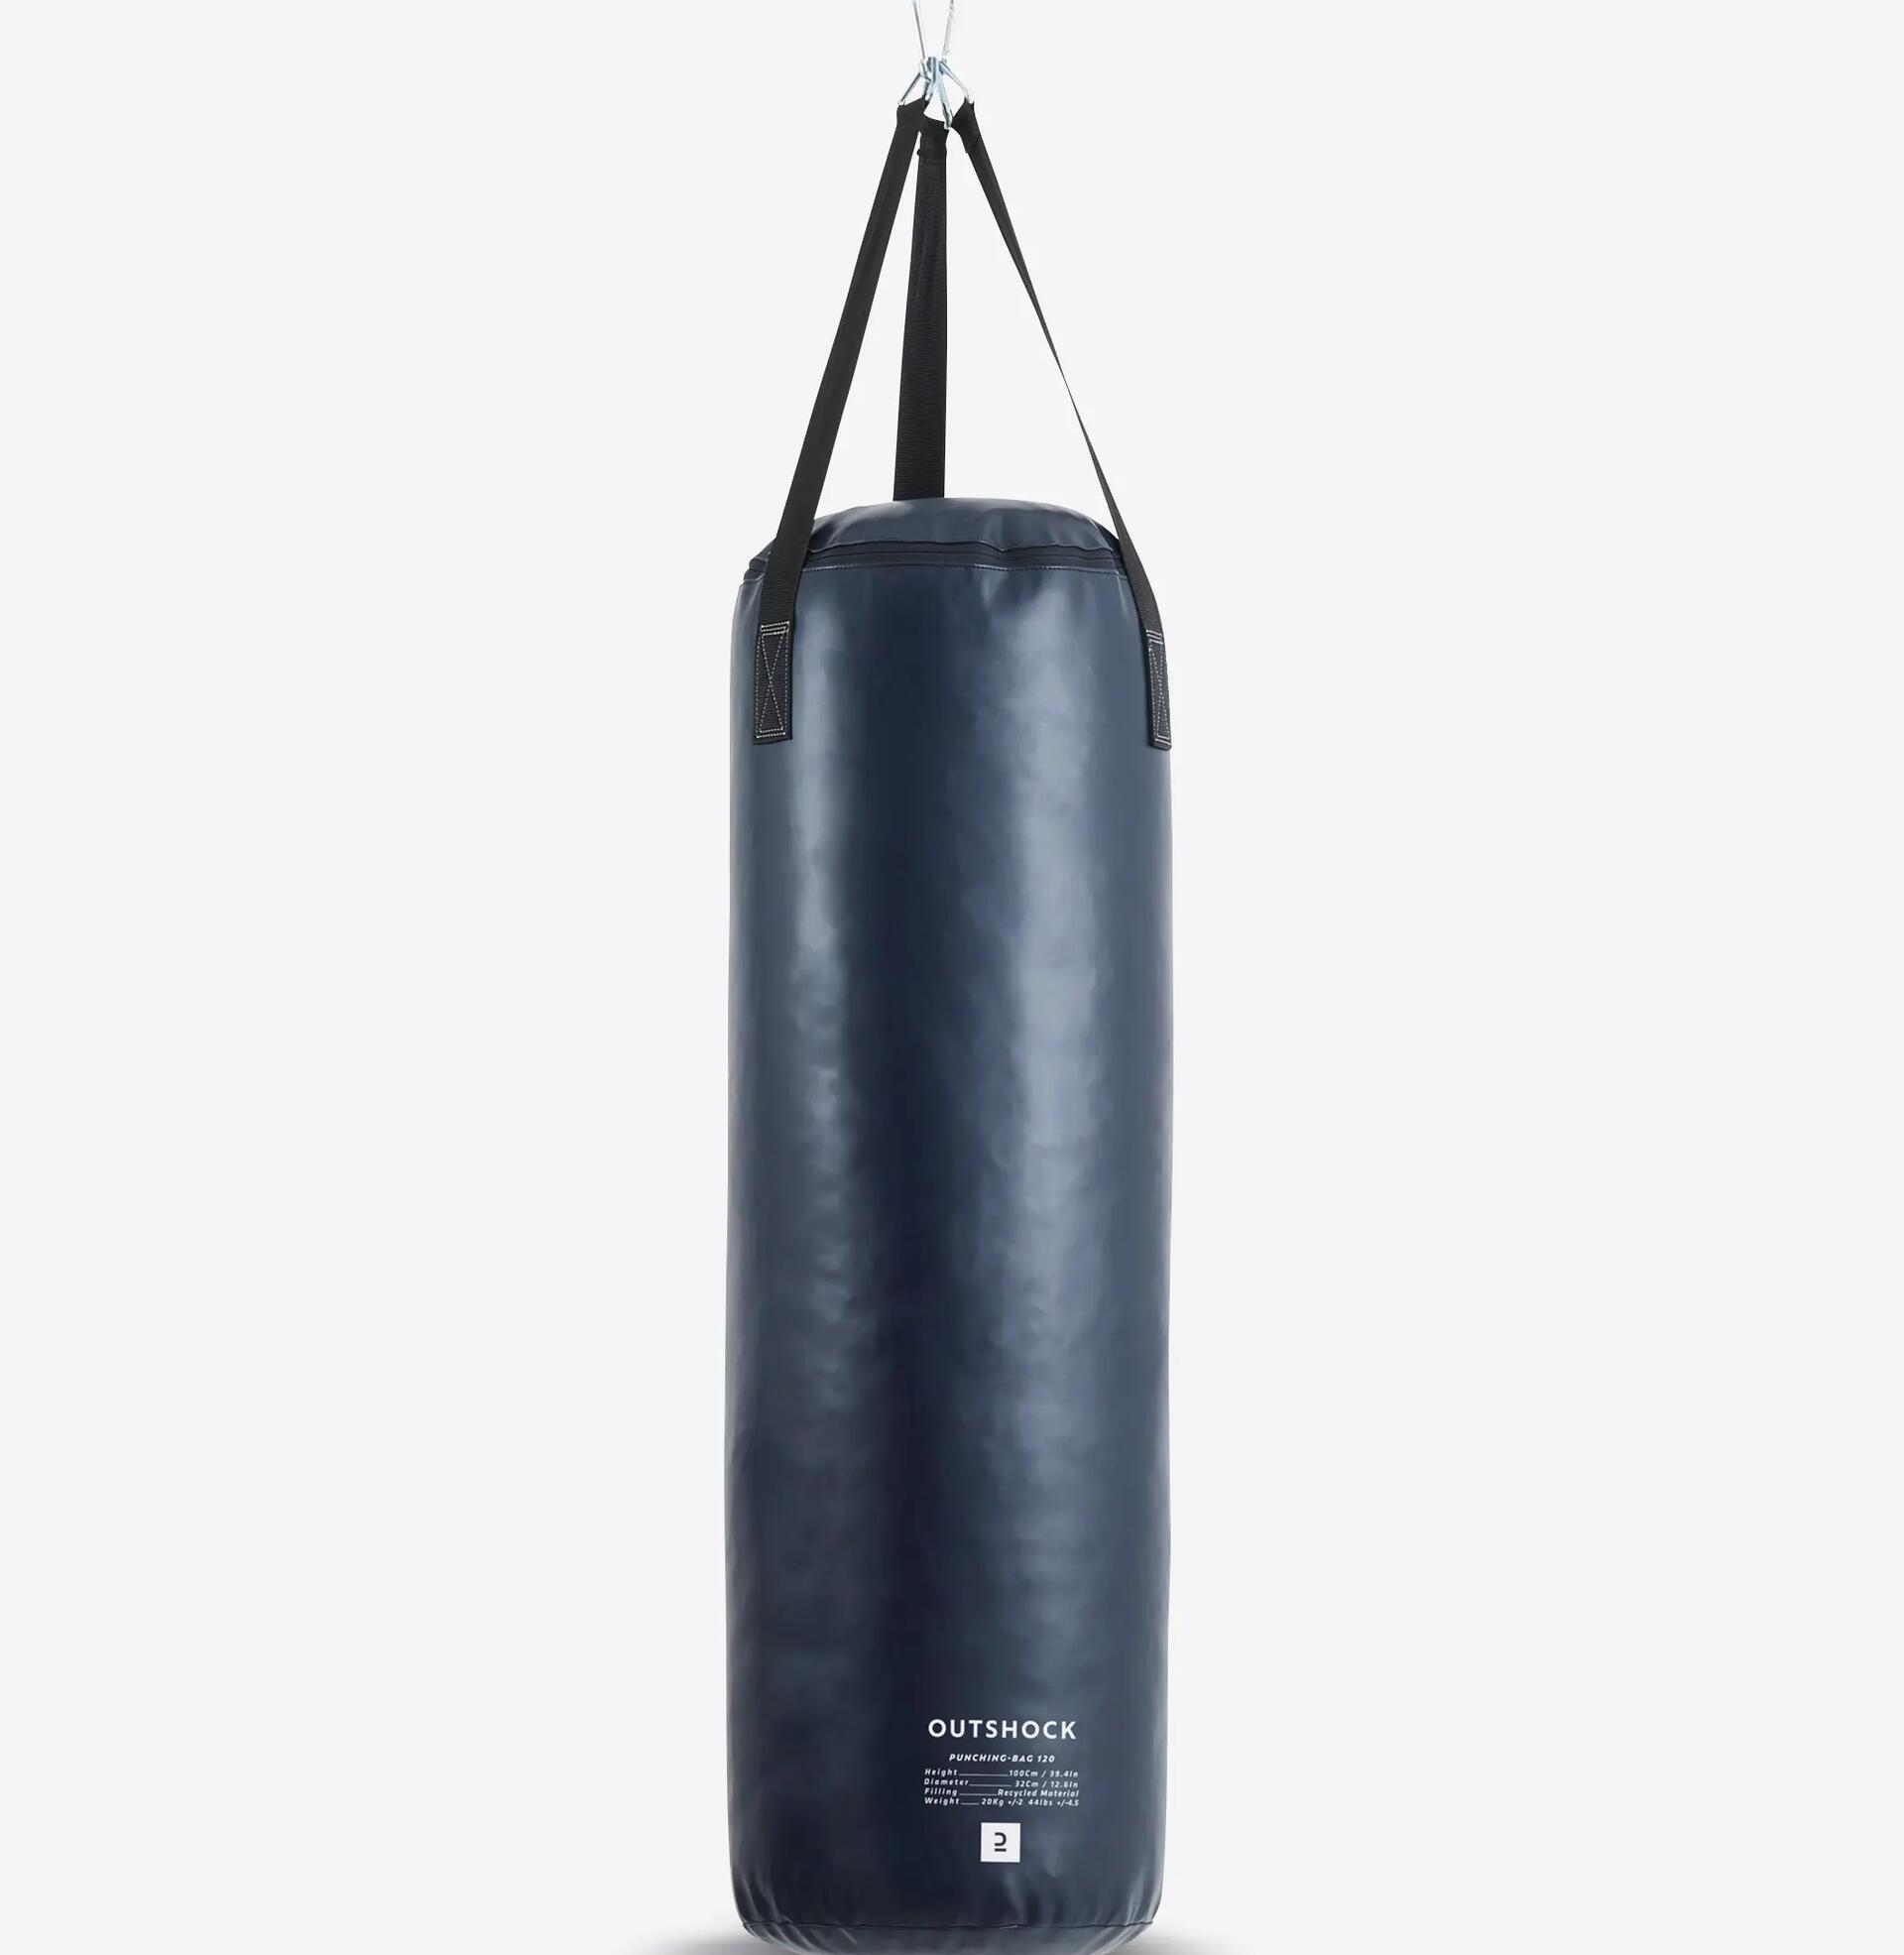 Boxing | How To Choose Your Punch Bag? 